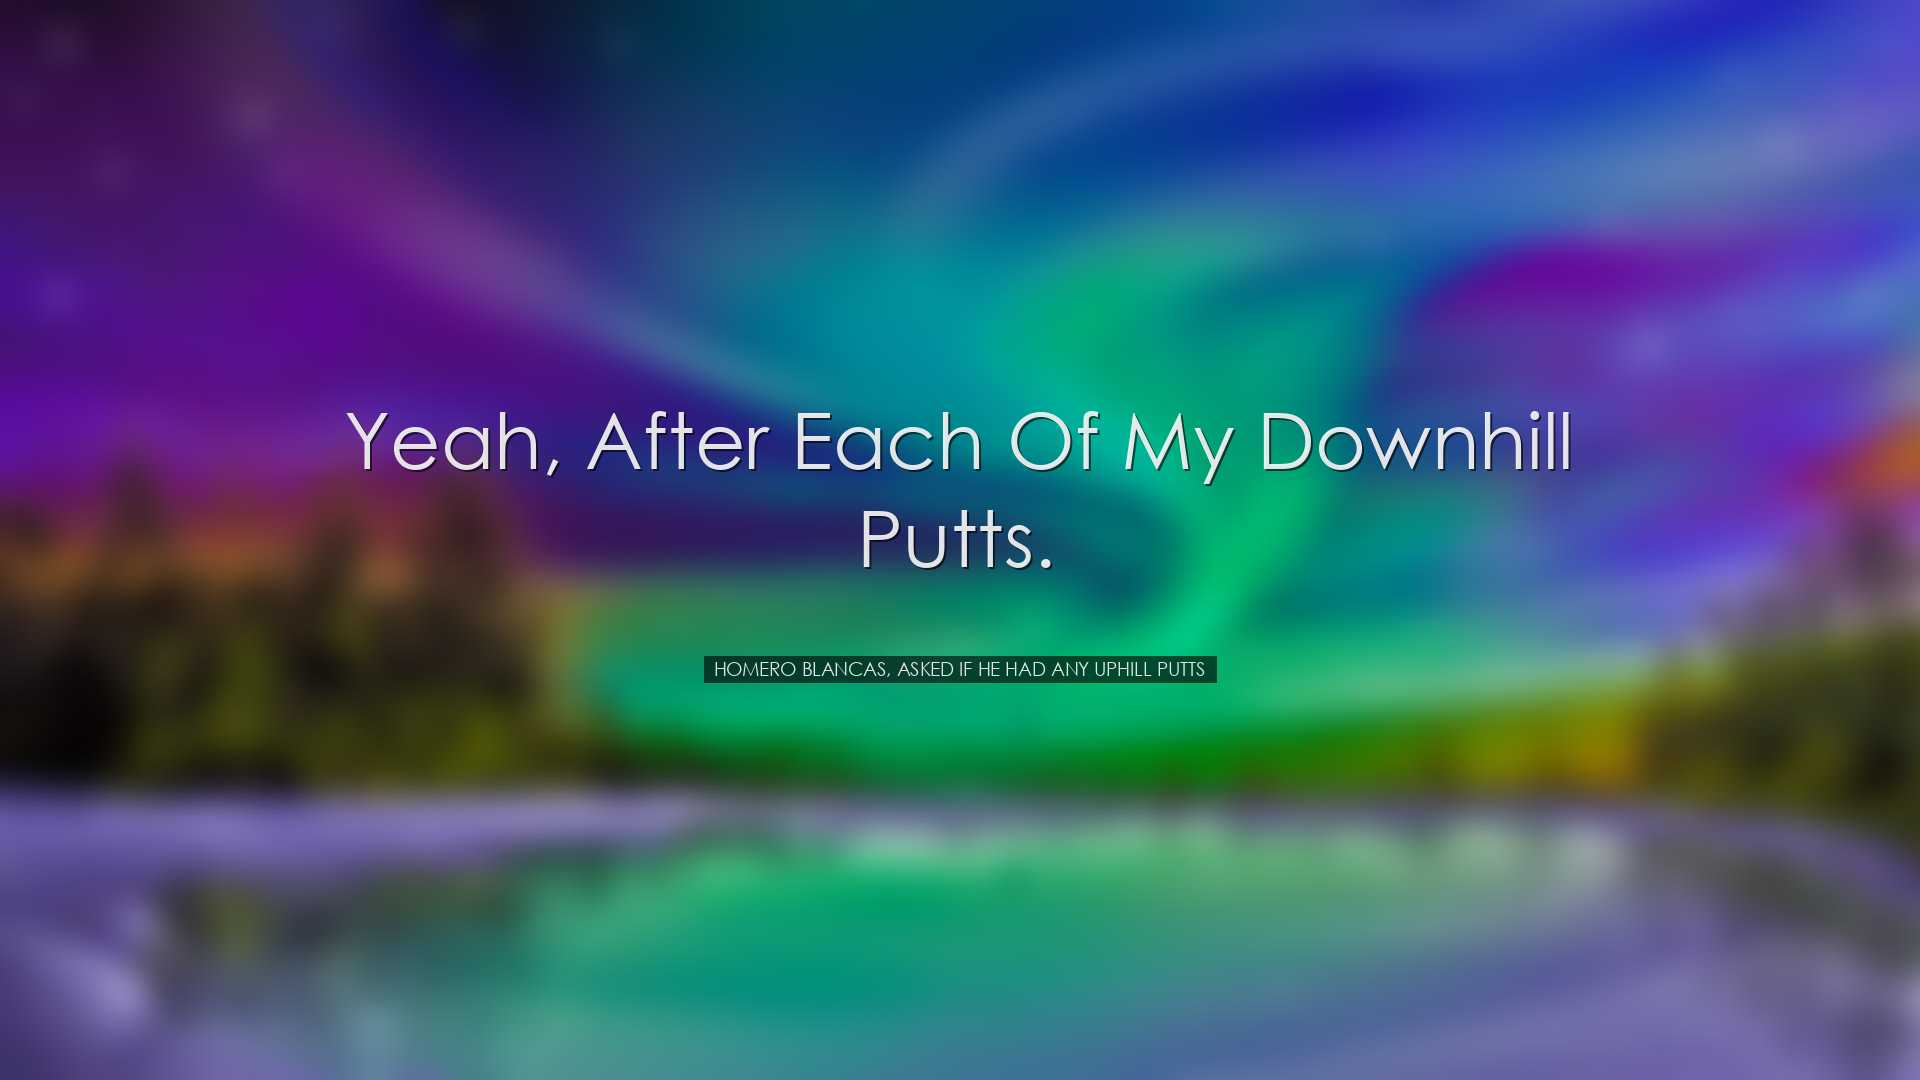 Yeah, after each of my downhill putts. - Homero Blancas, asked if